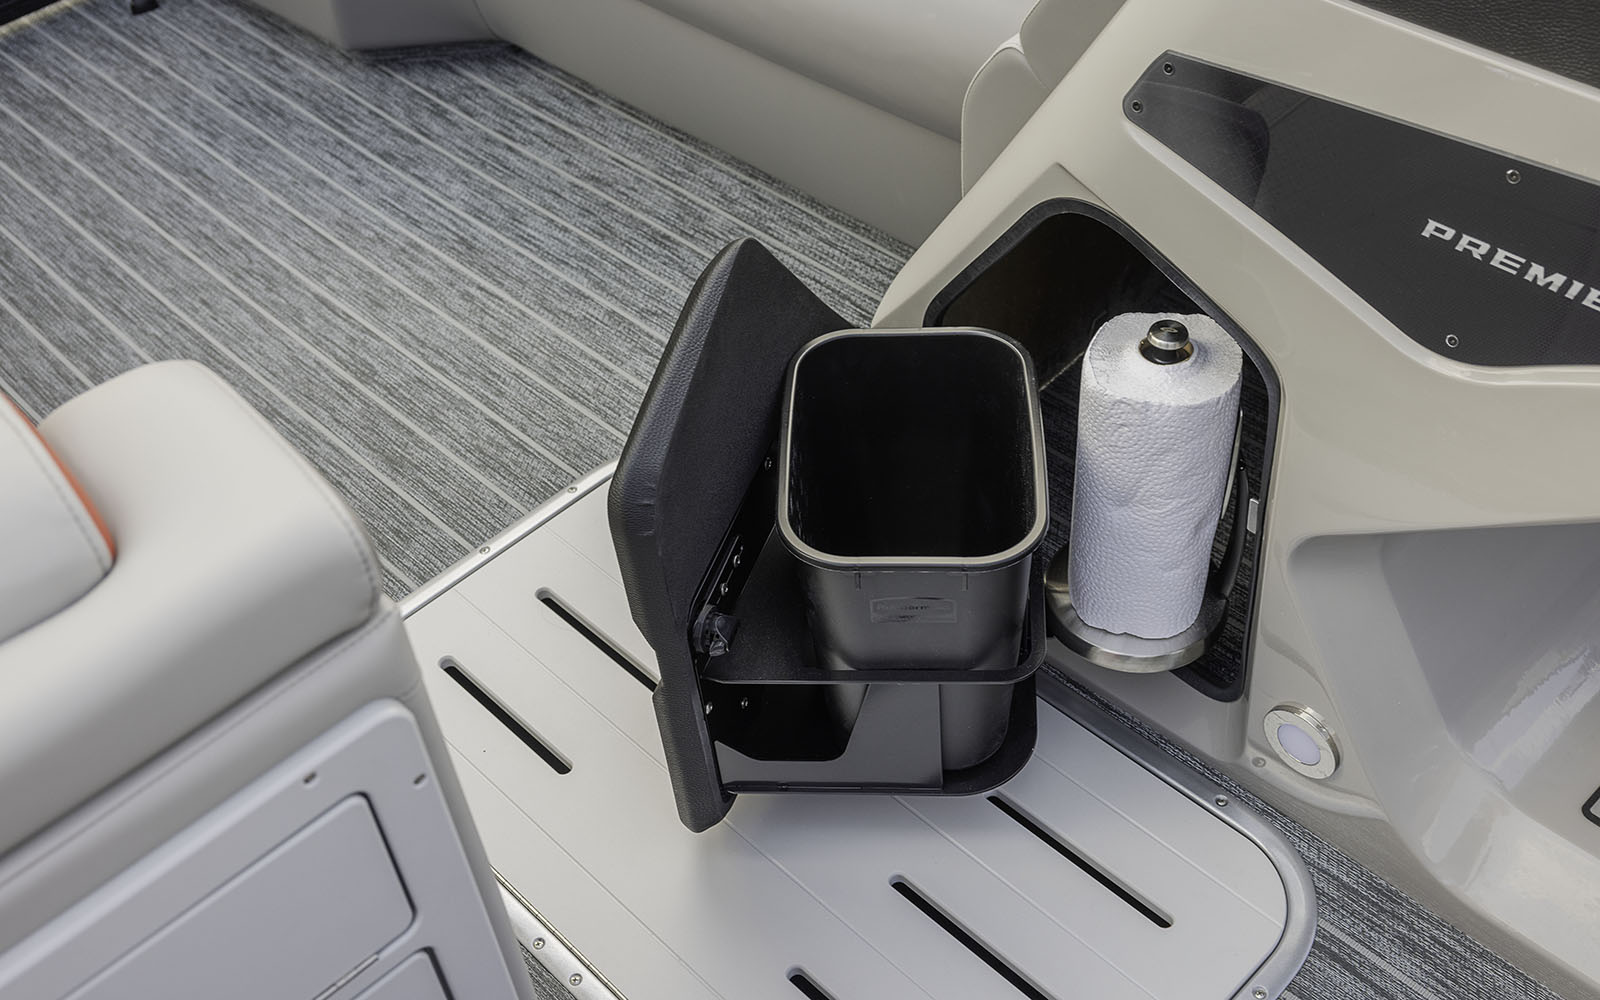 Helm storage with trash can and paper towel holder